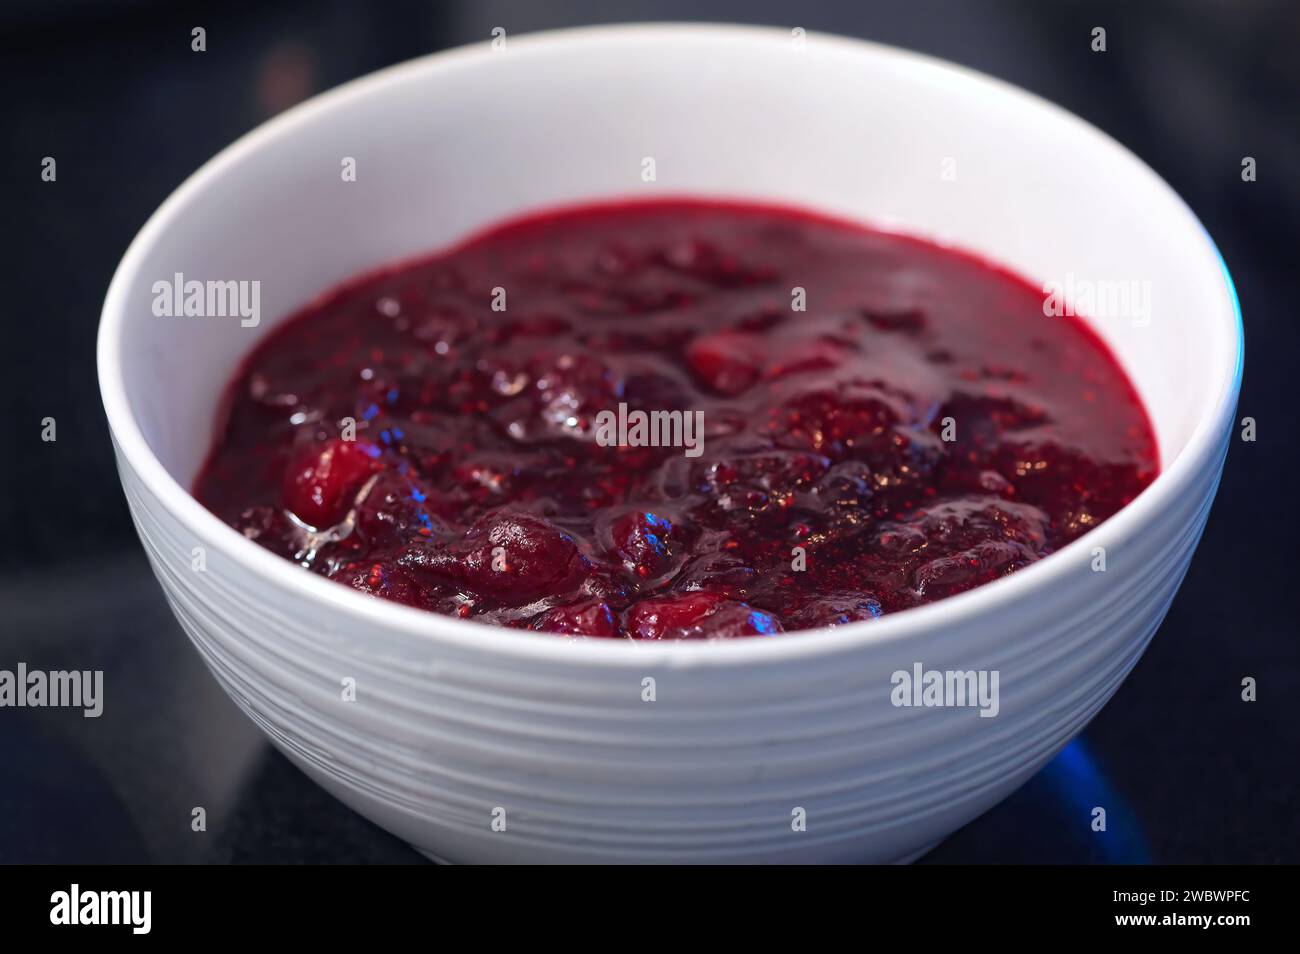 Cranberry Sauce or Jam (Vaccinium macrocarpon) in a white bowl with dark background. Stock Photo